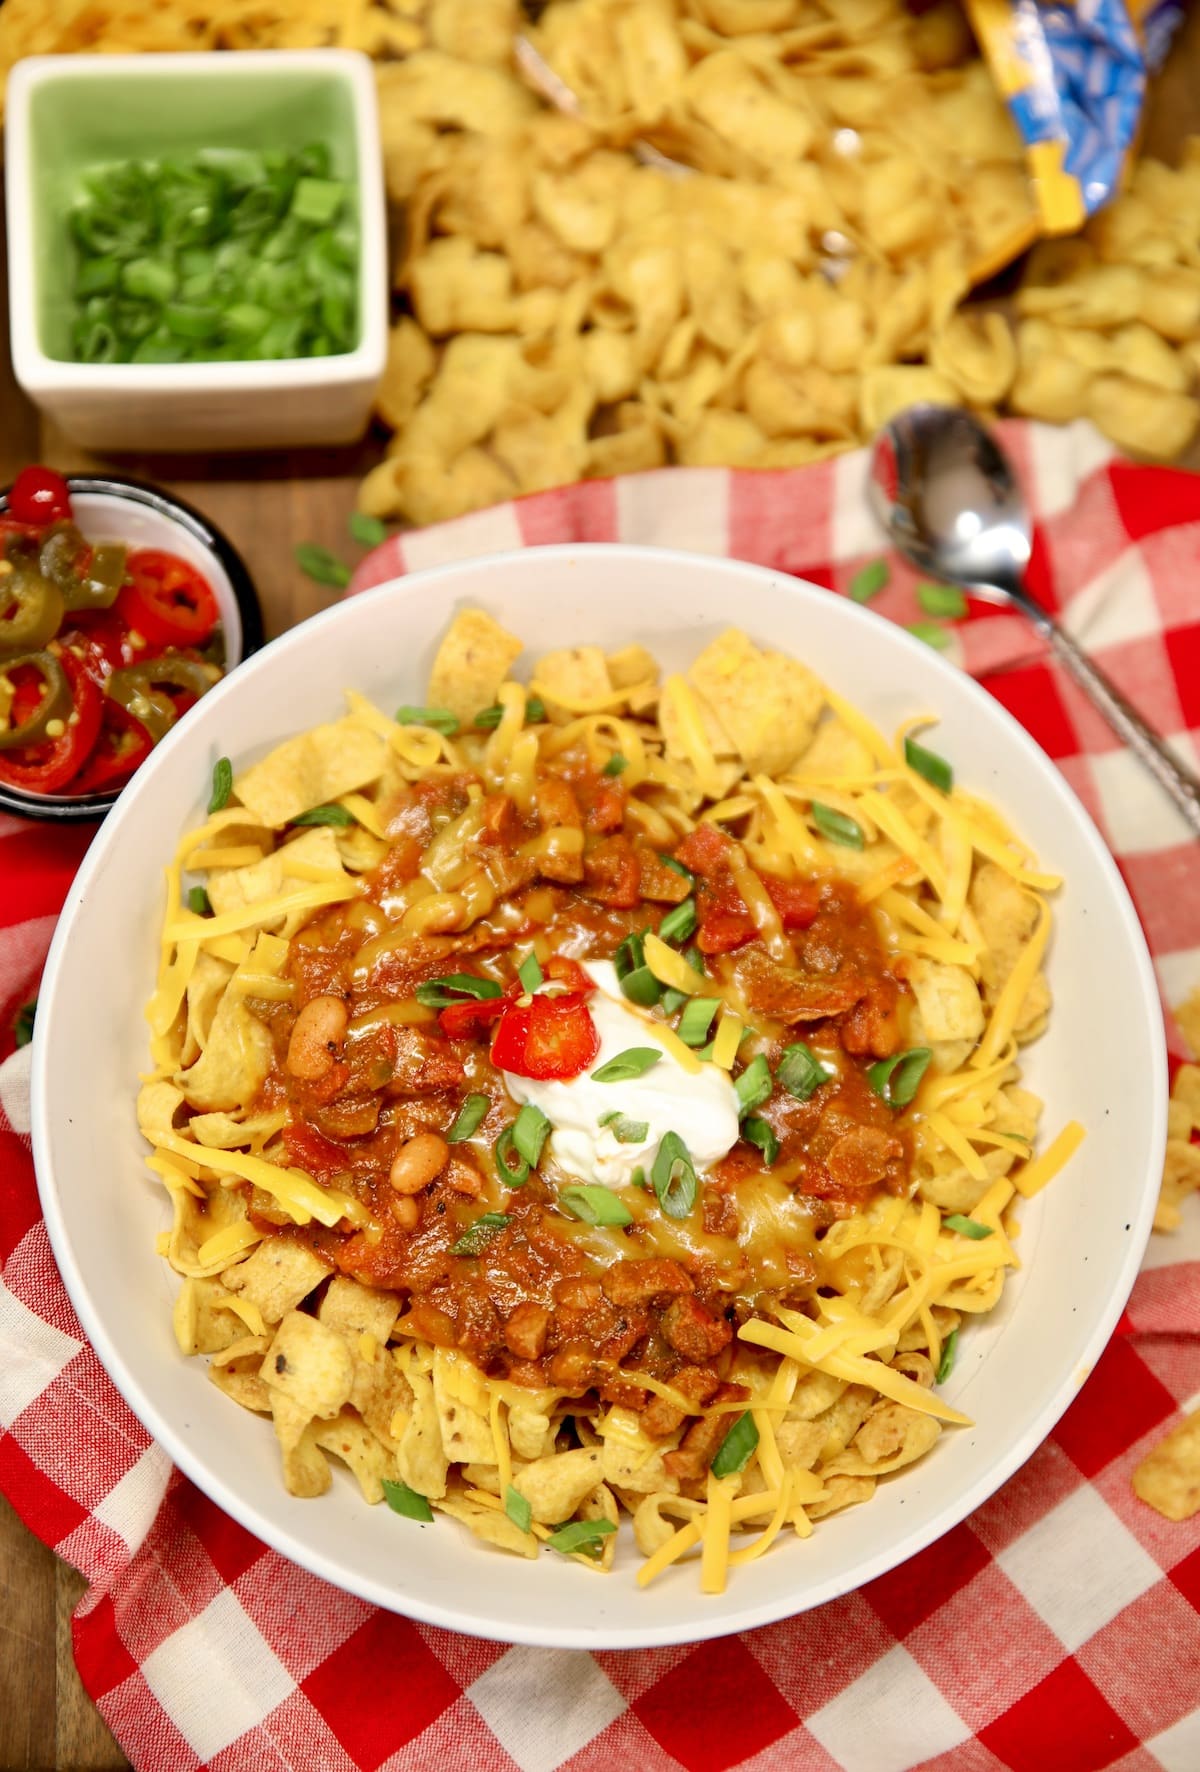 Bowl of frito chili pie with green onions and sour cream.